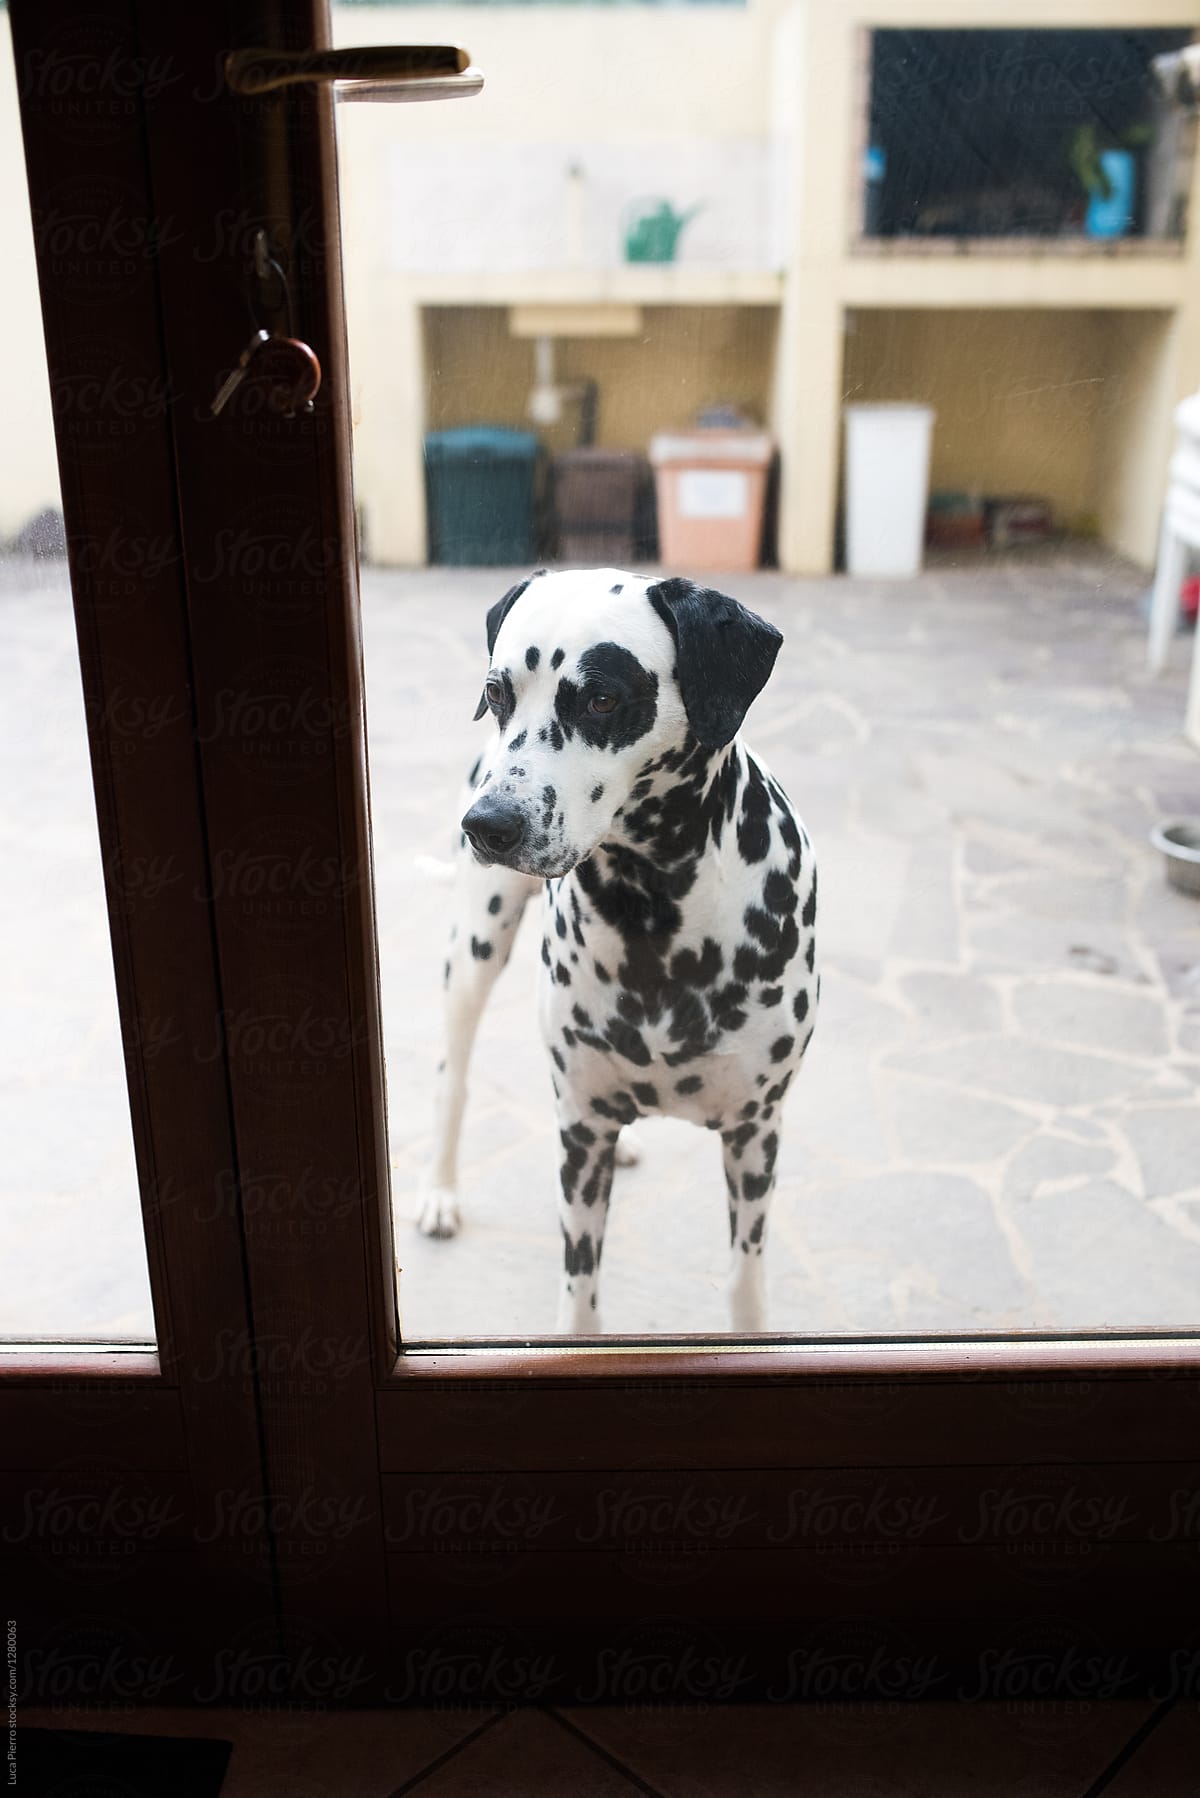 Dalmatian dog asking to come inside the house